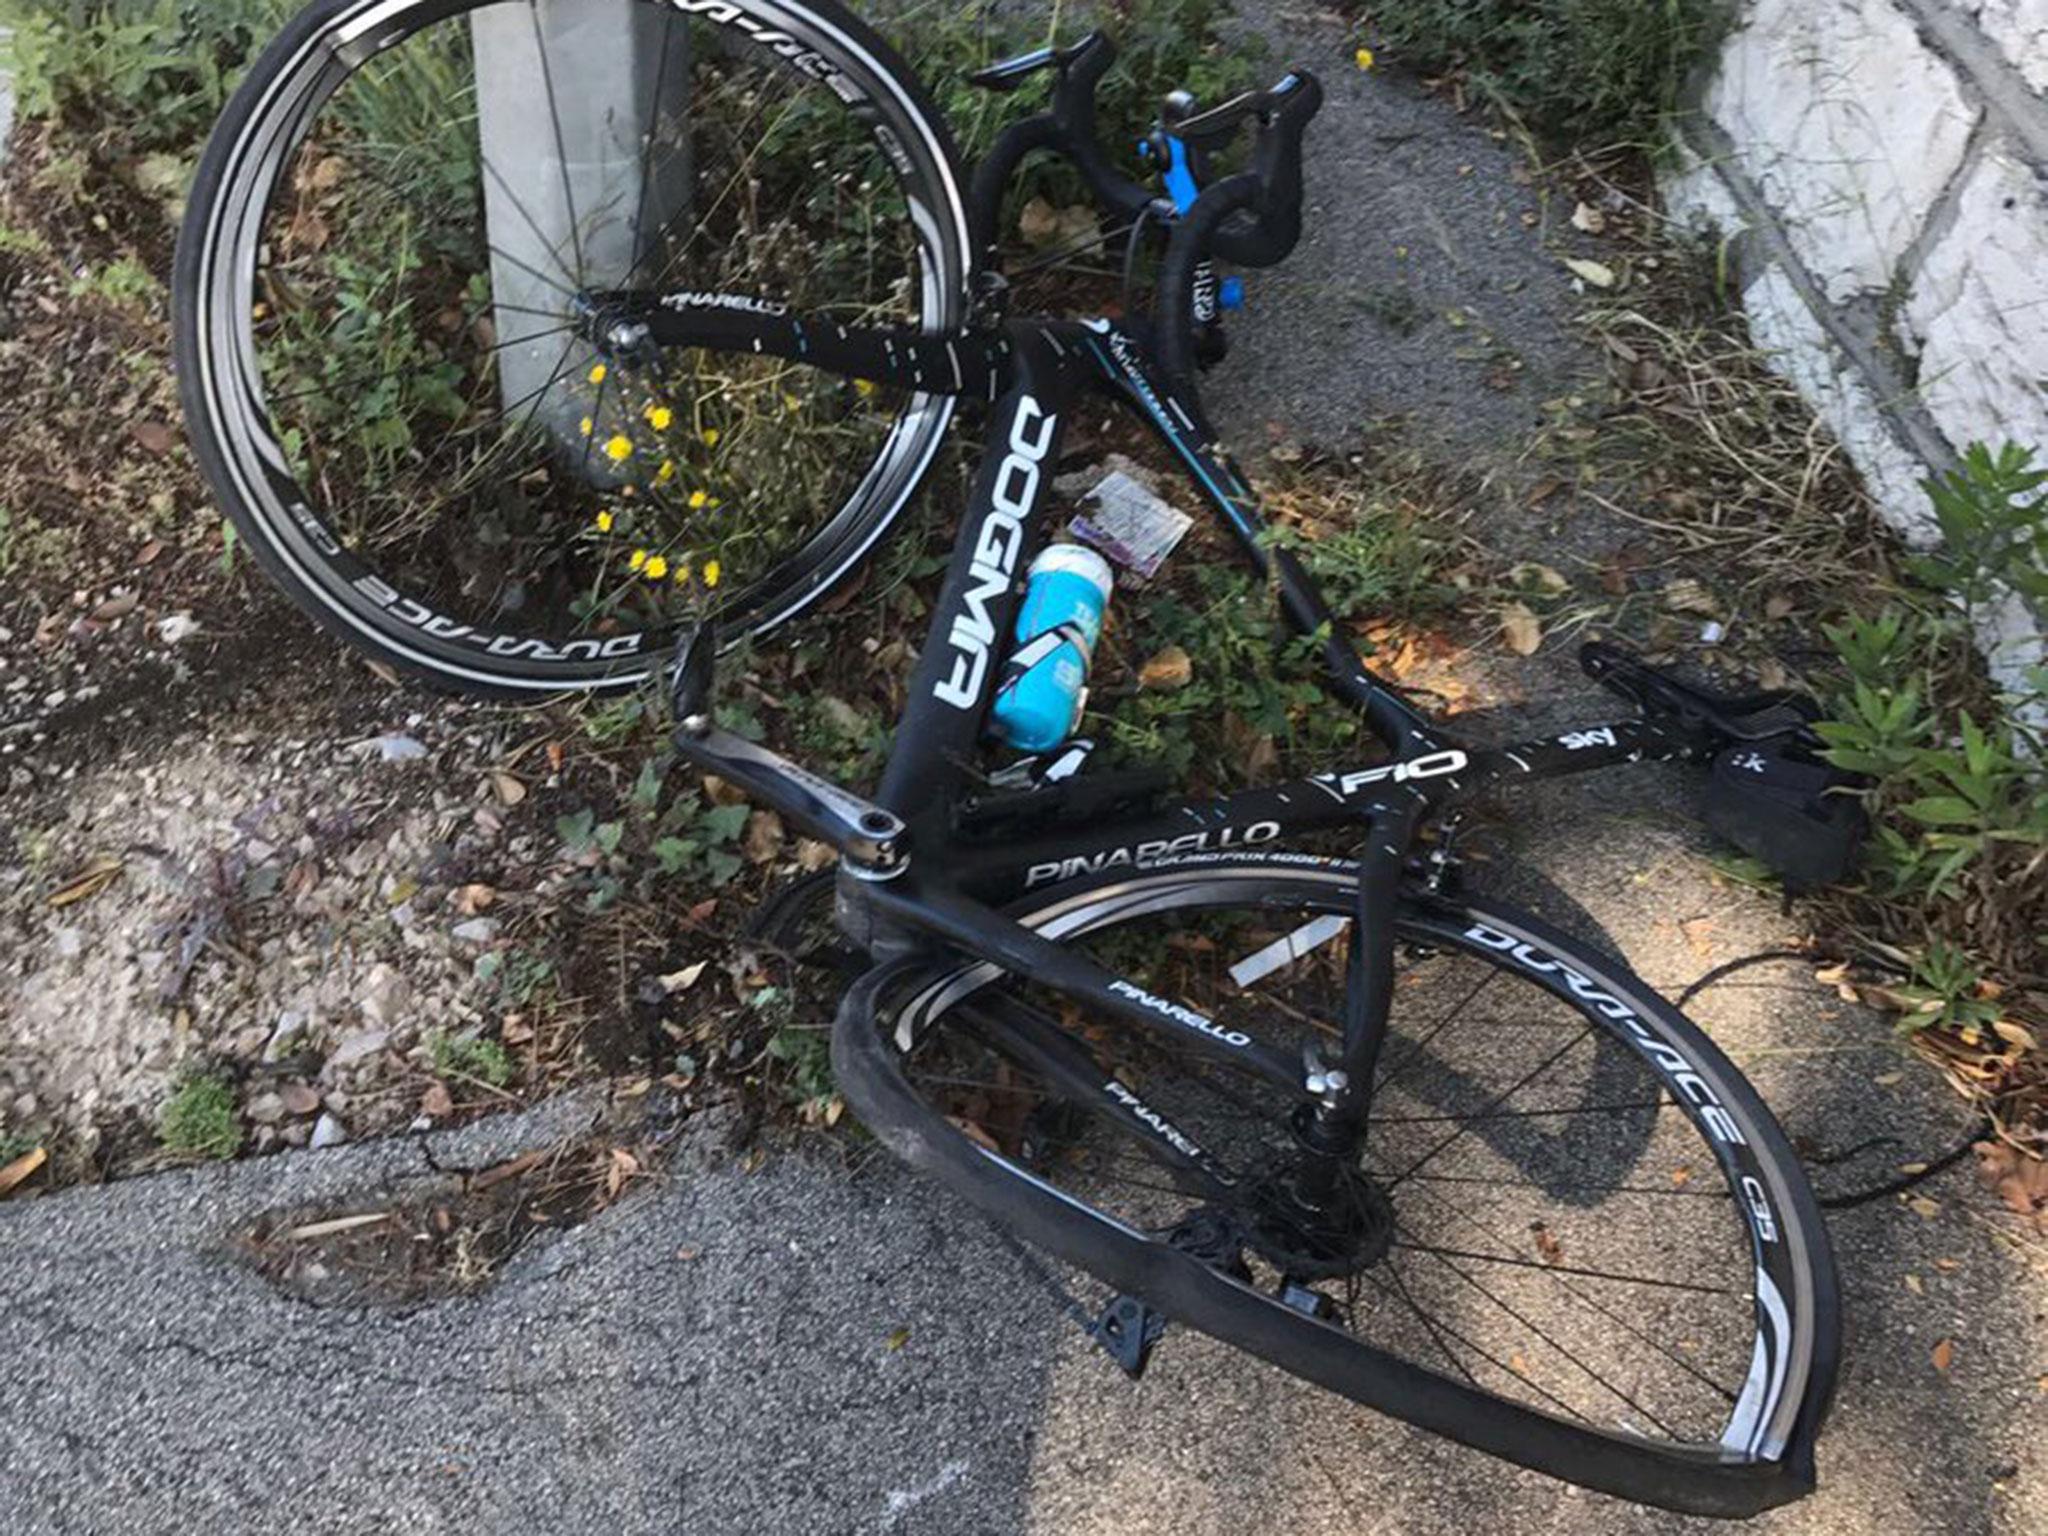 The cyclist posted a picture on Twitter of his damaged bike after the incident